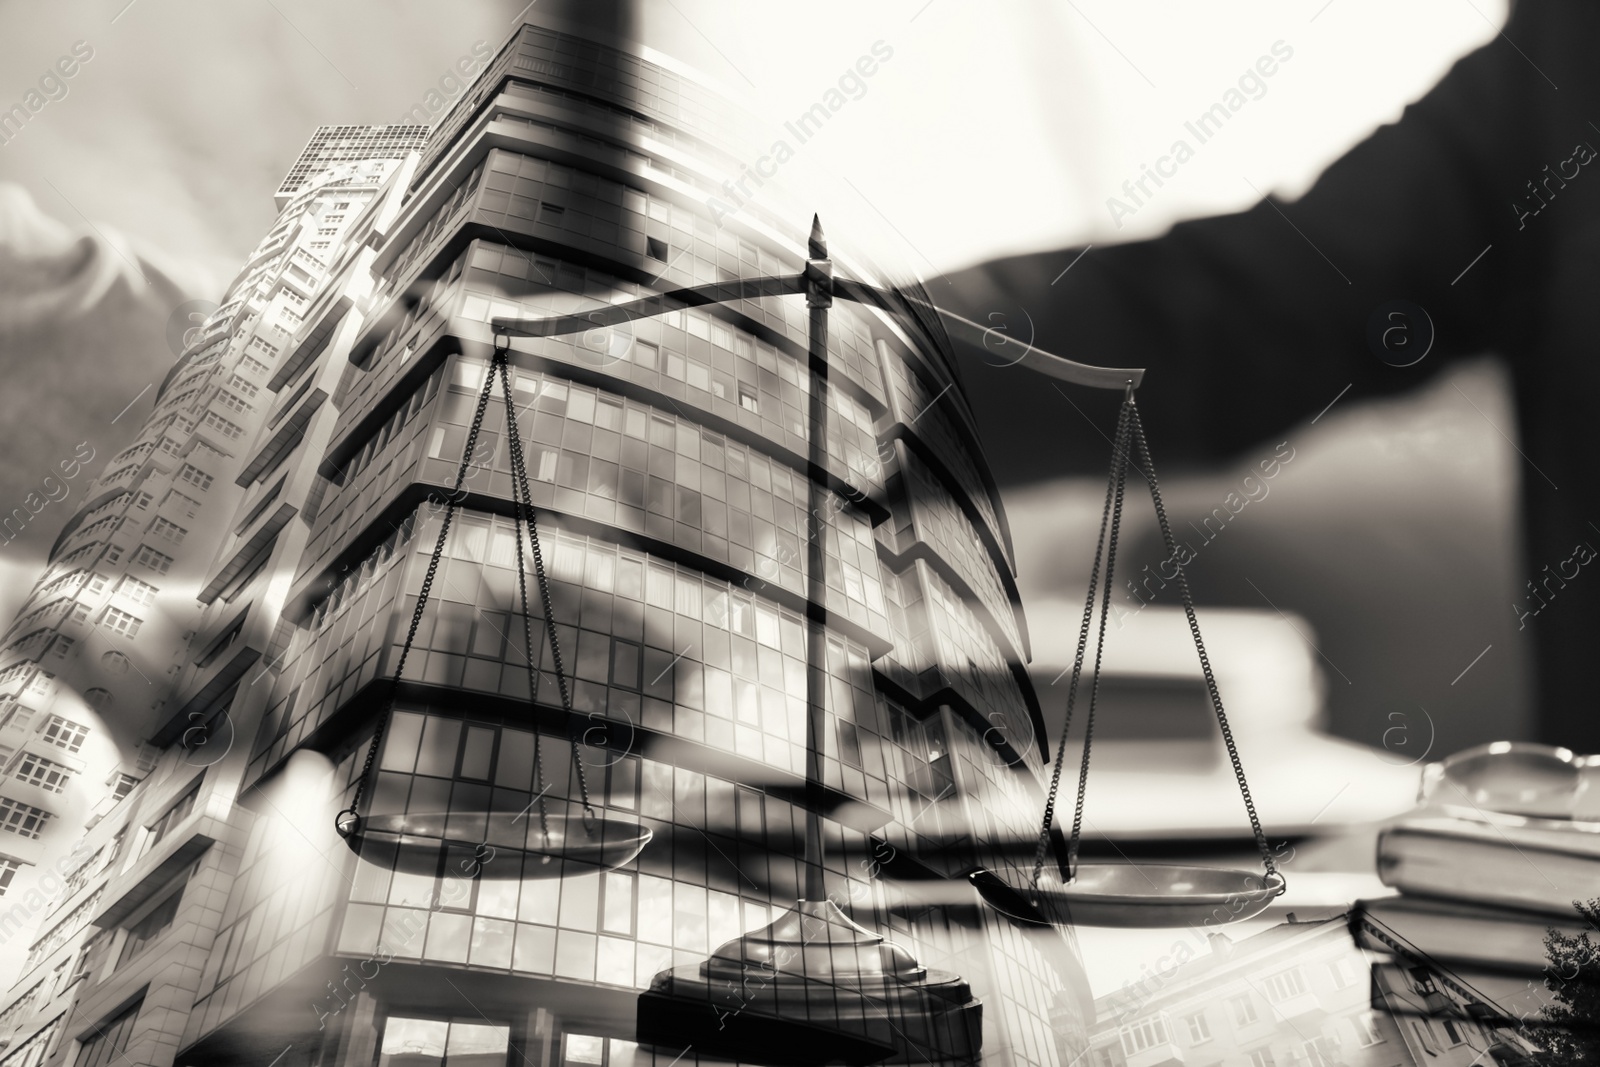 Image of Law protection. Double exposure of scales and building